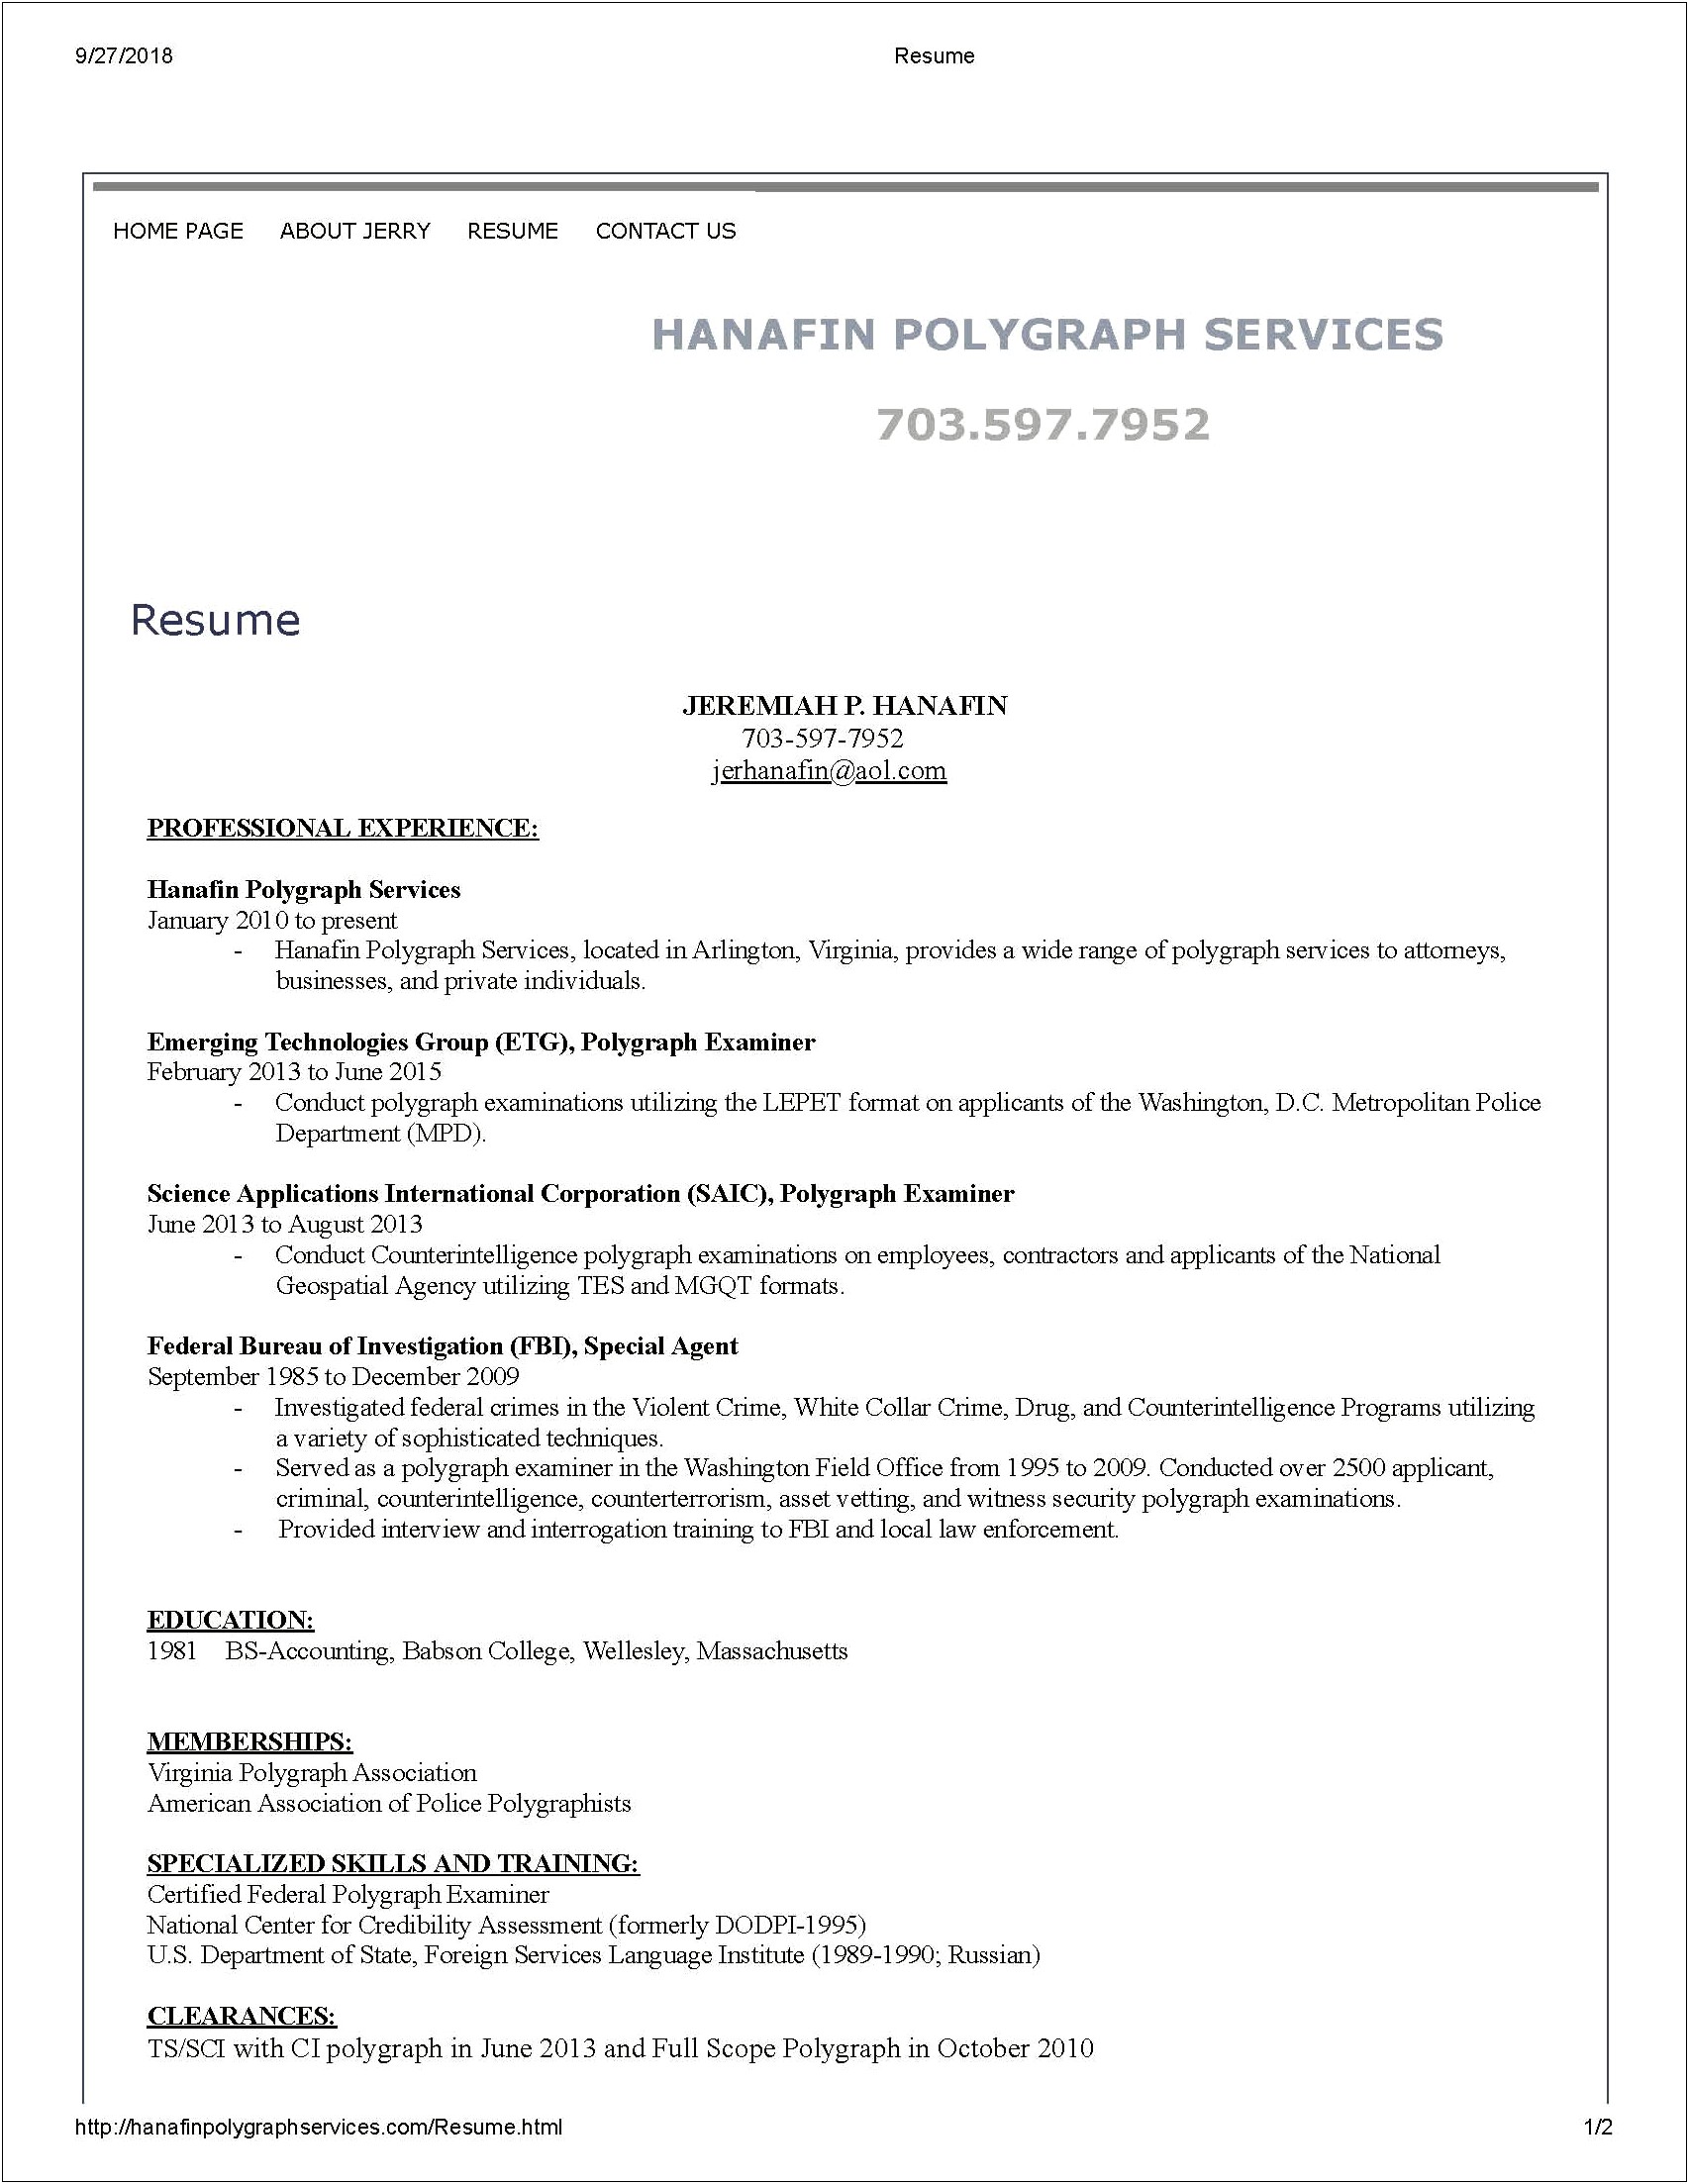 Fbi Special Agent Federal Resume Template